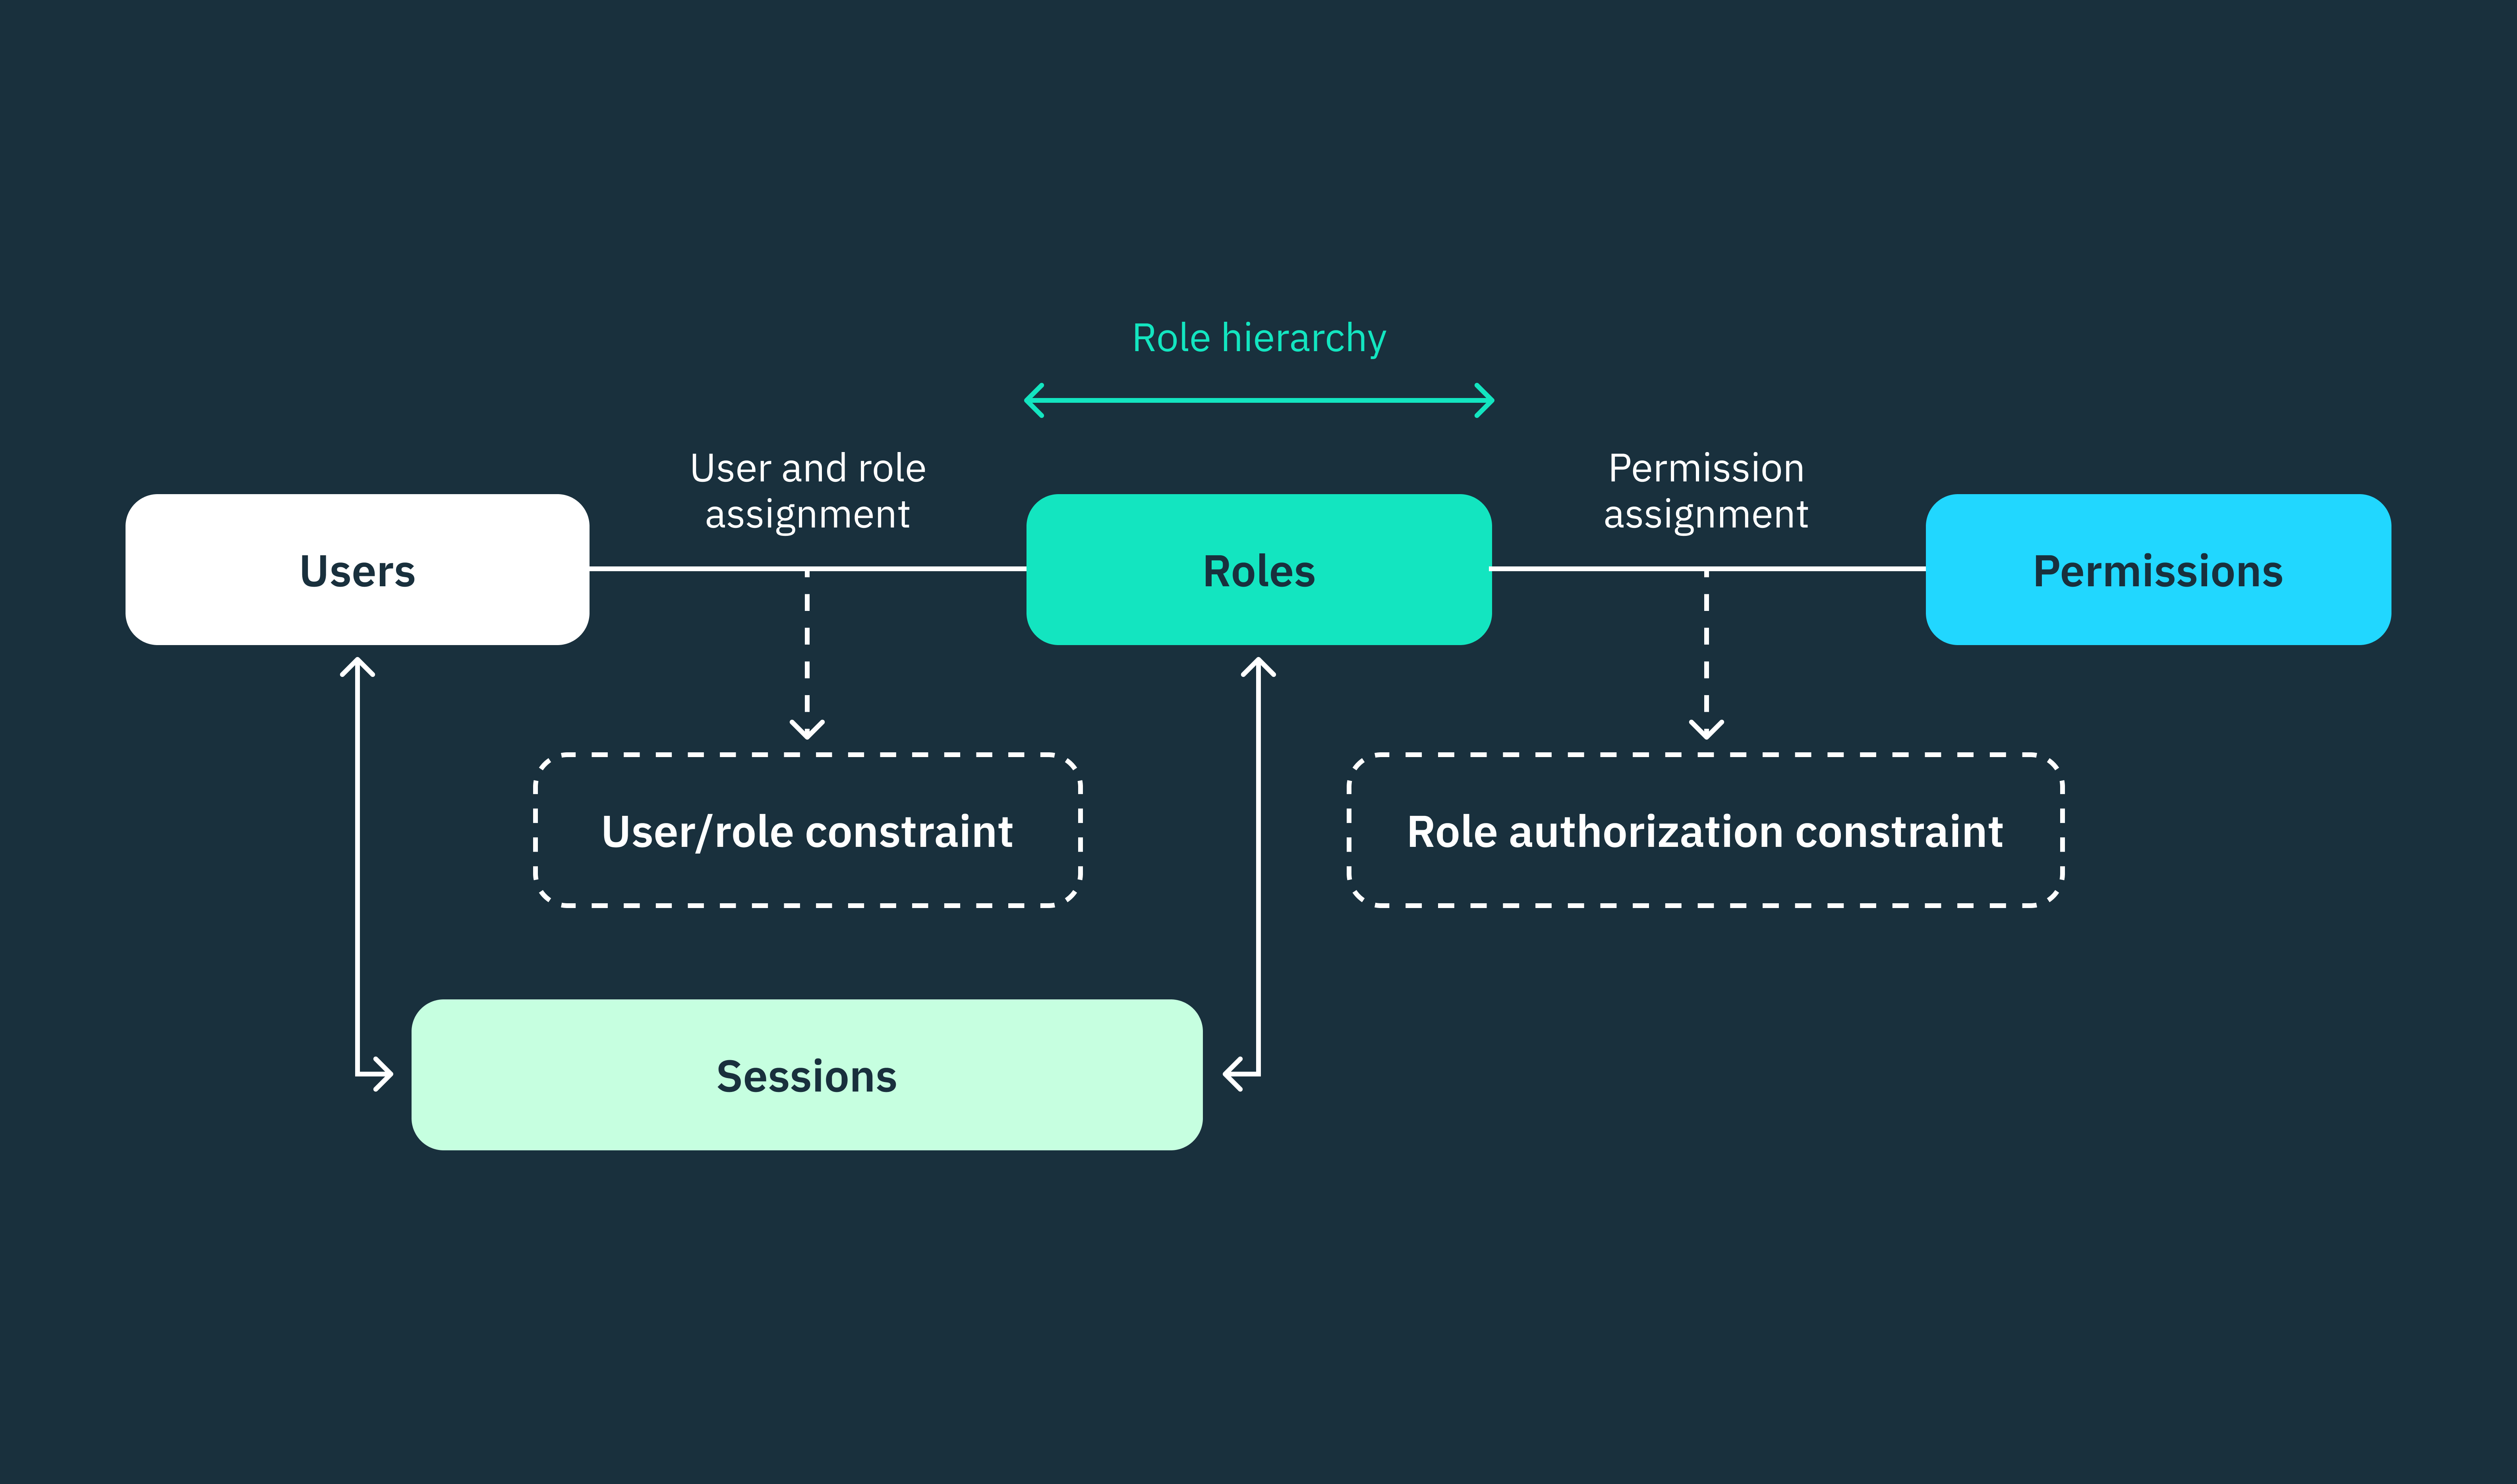 Diagram showing how the core principles (user assignment, permission assignment, role authorization) of RBAC come together in RBAC architectures.